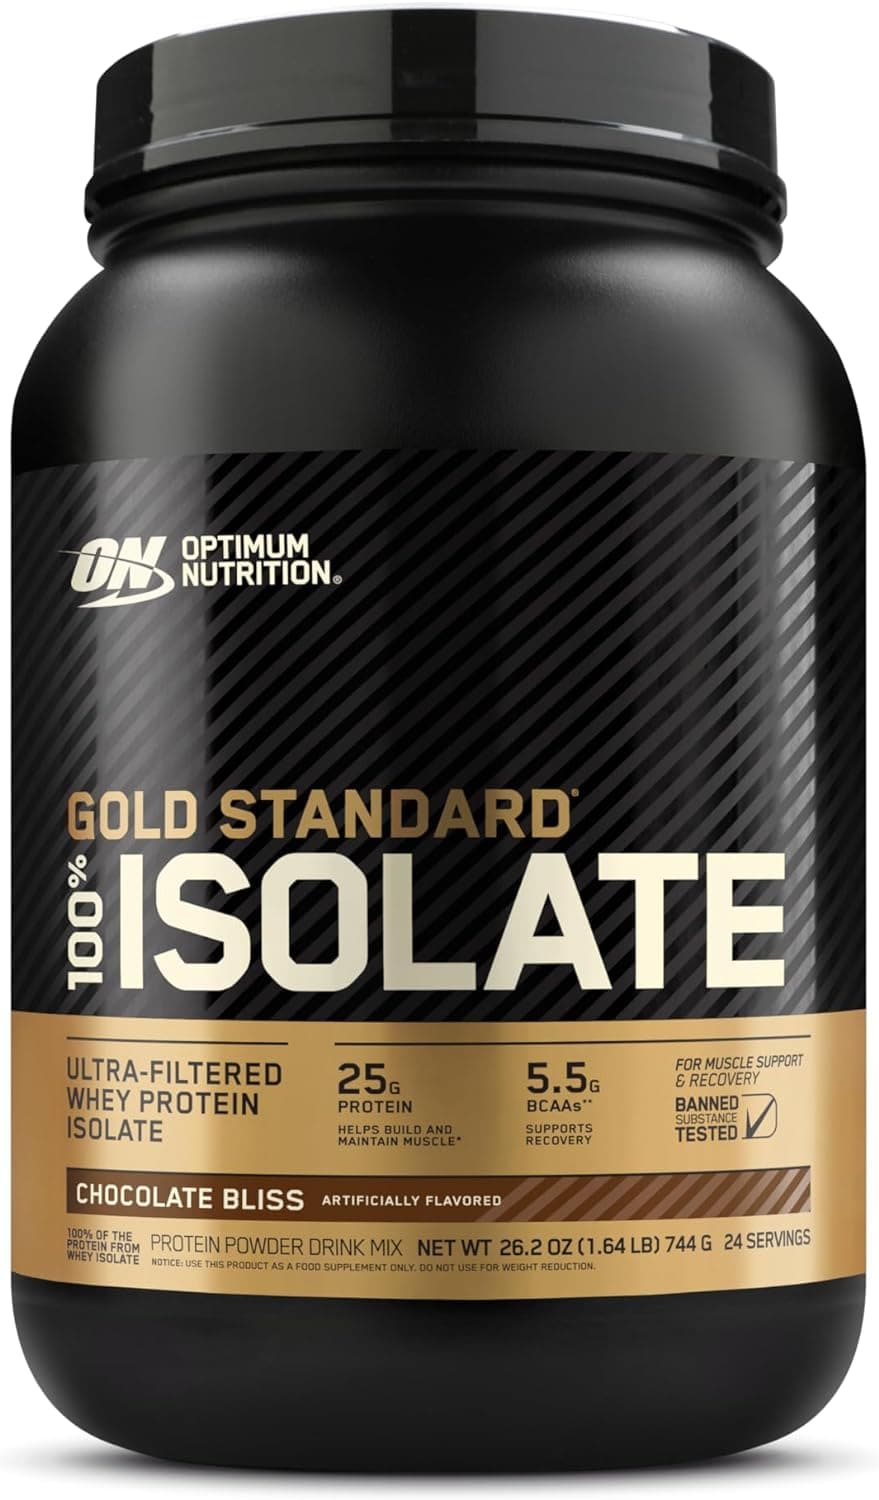 Optimum Nutrition Gold Standard 100% Isolate Hydrolyzed and Ultra-Filtered Whey Protein Isolate for , Chocolate Bliss, 1.64 lbs - 24 Servings - 744 Grams